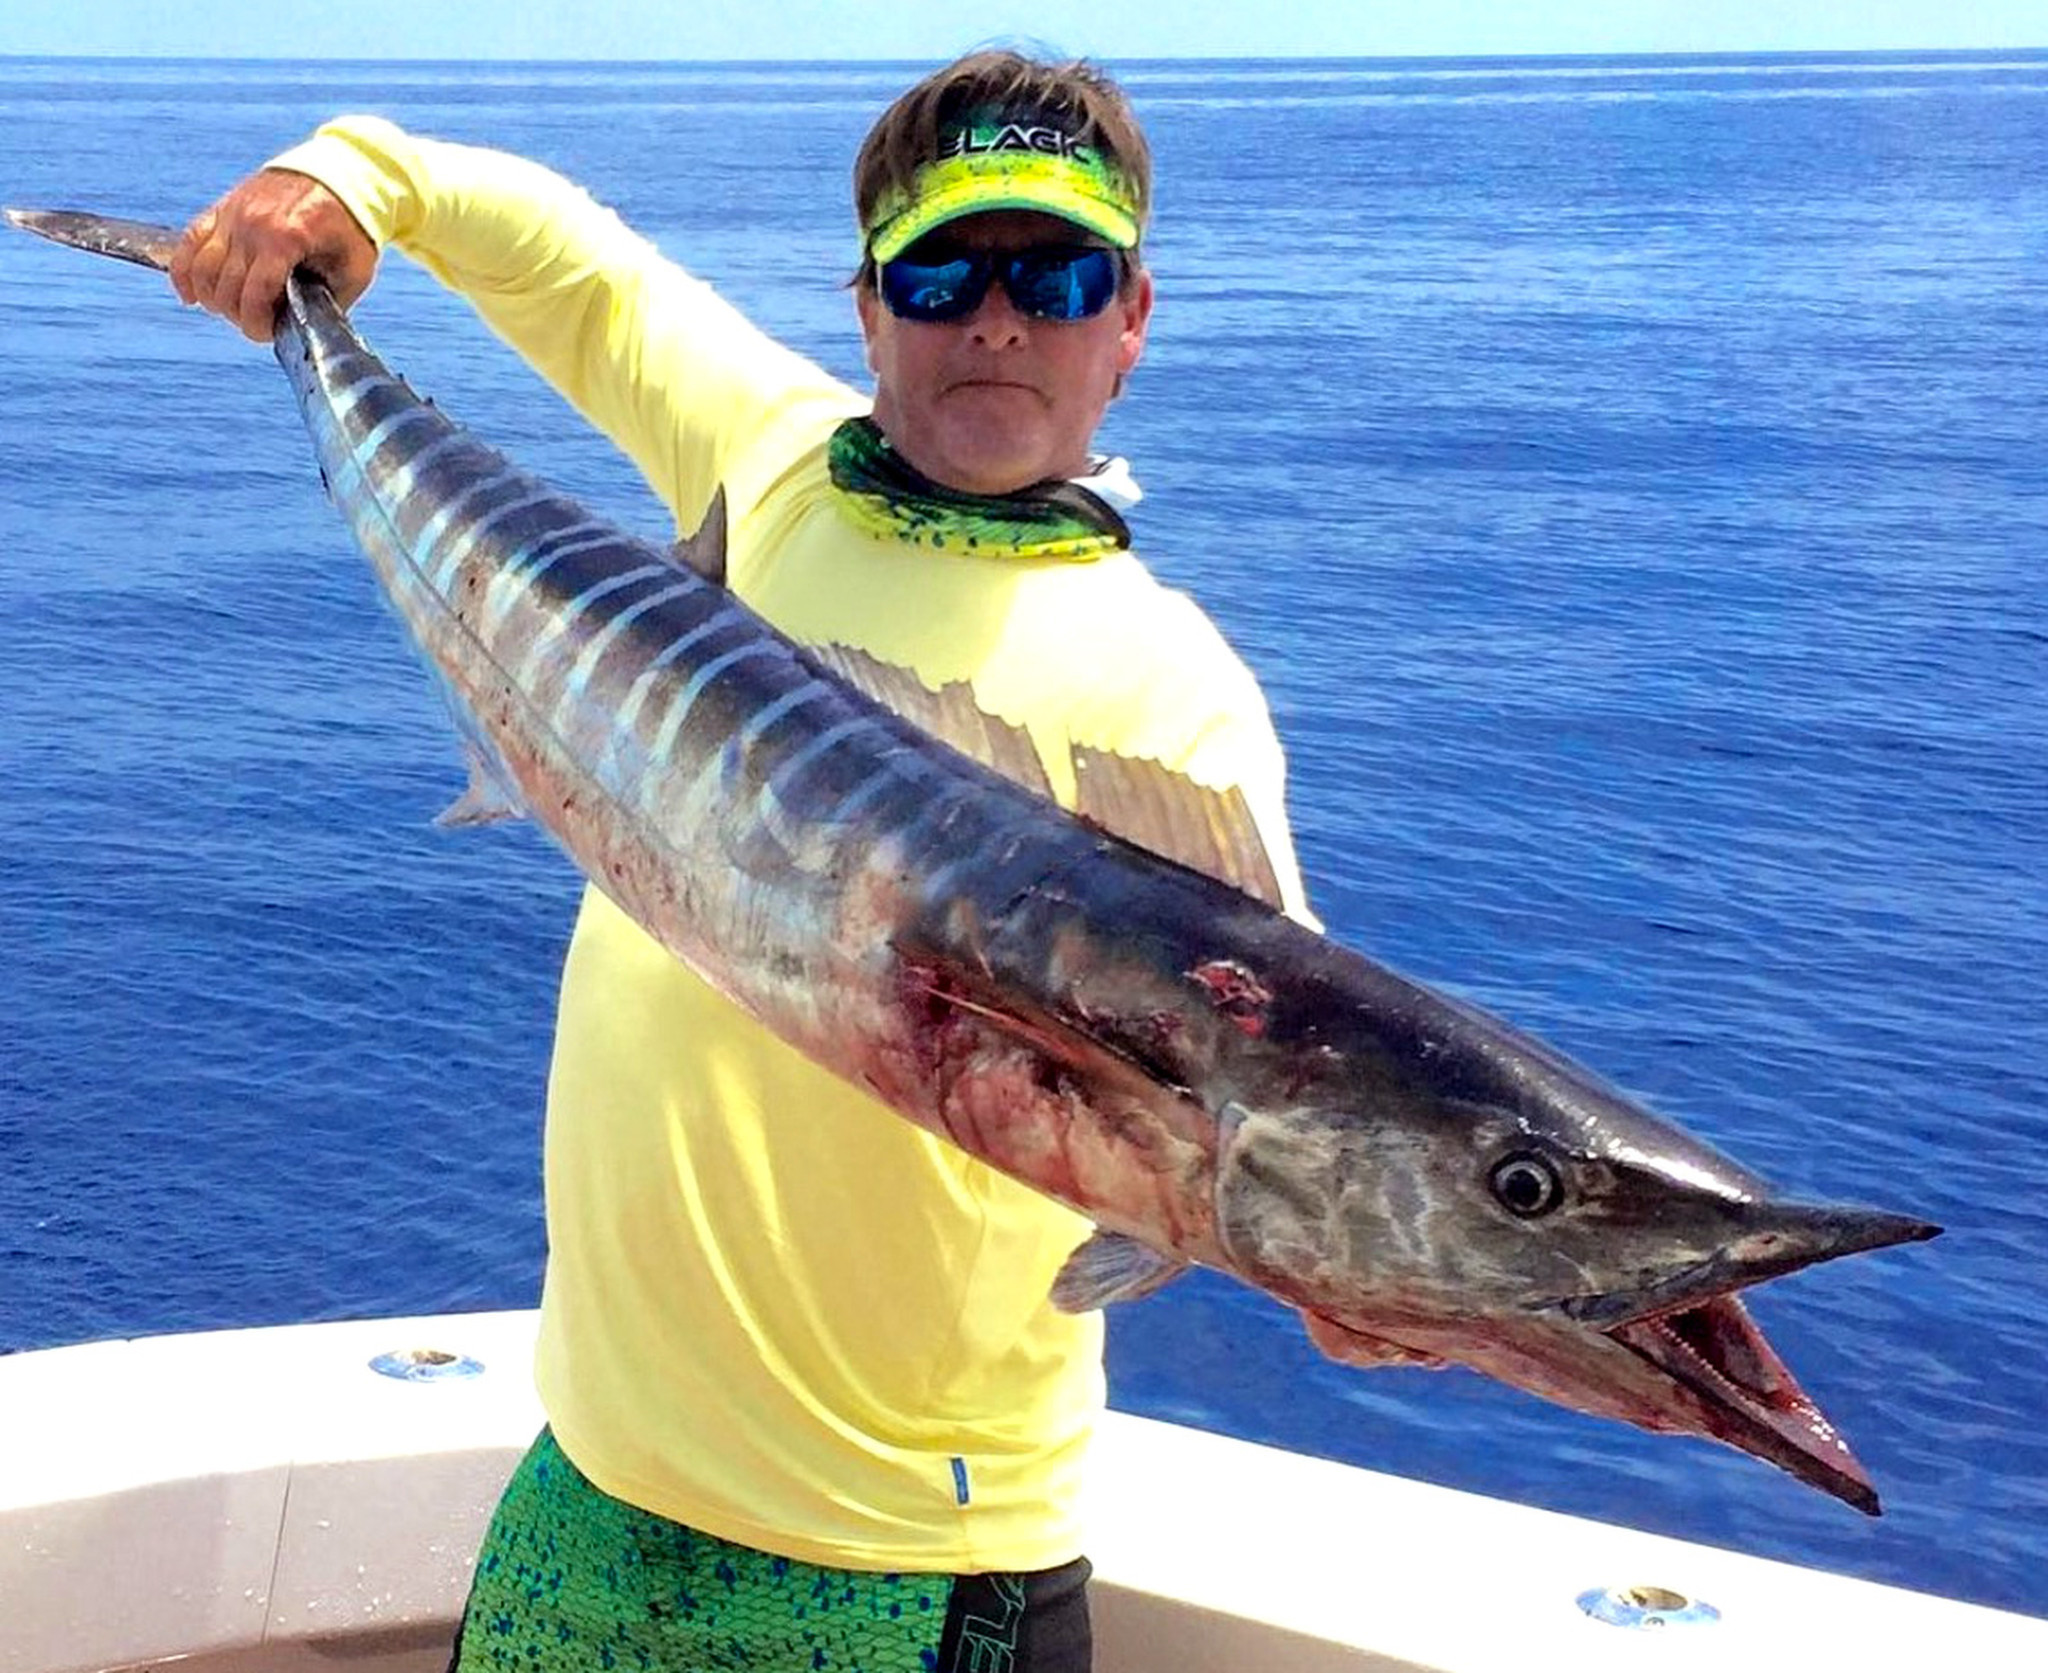 Full moon means it's time to catch wahoo - Sun Sentinel